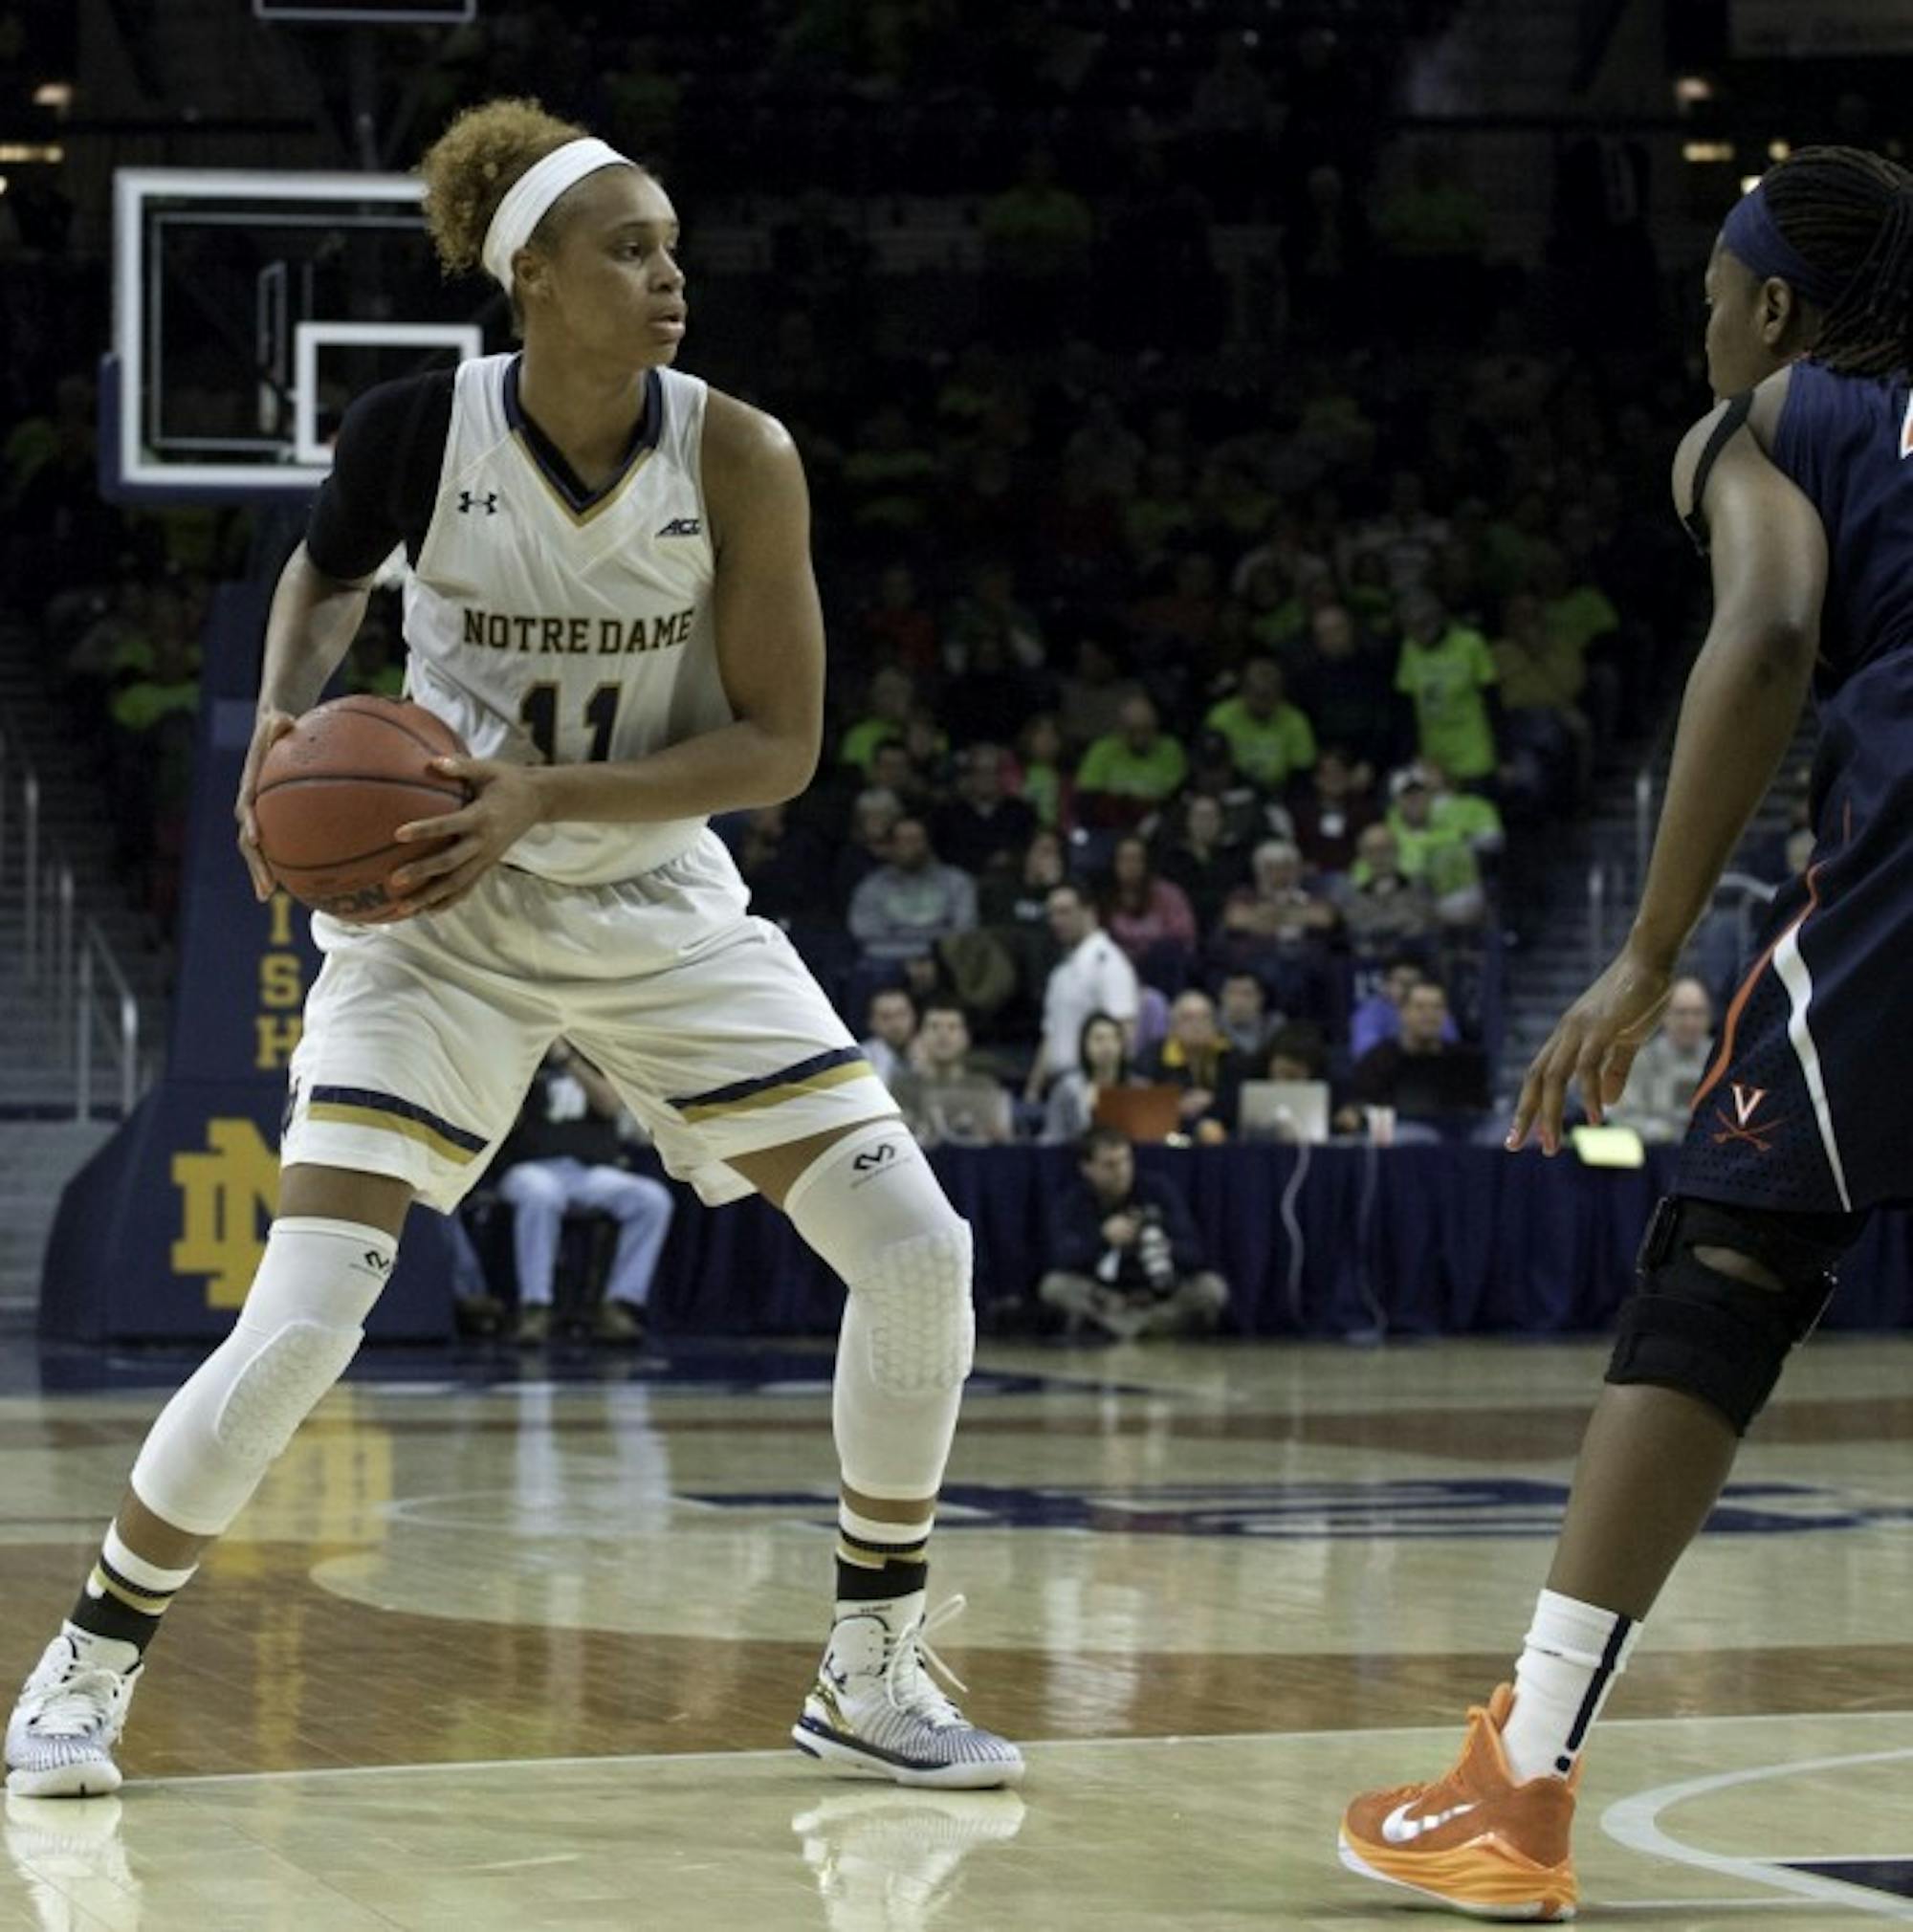 Irish freshman forward Brianna Turner takes in the court during Notre Dame’s 75-54 victory over Virginia on Feb. 5 in an ACC match-up at Purcell Pavilion.